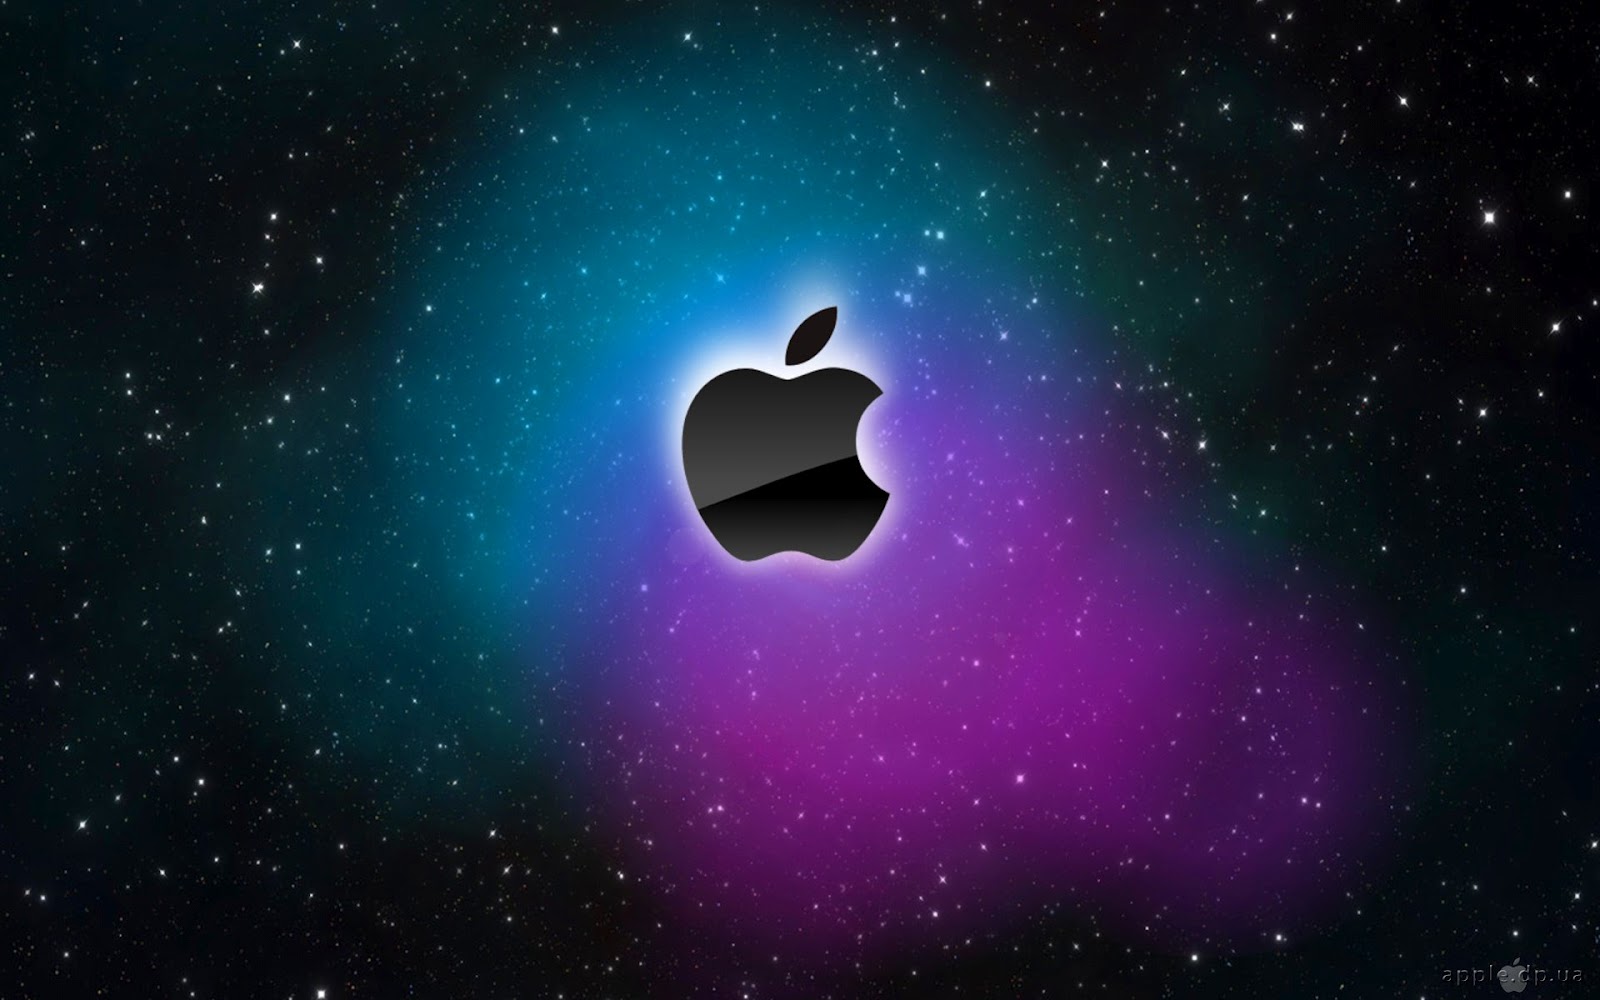 apple style wallpapers 1920x1200 by apple